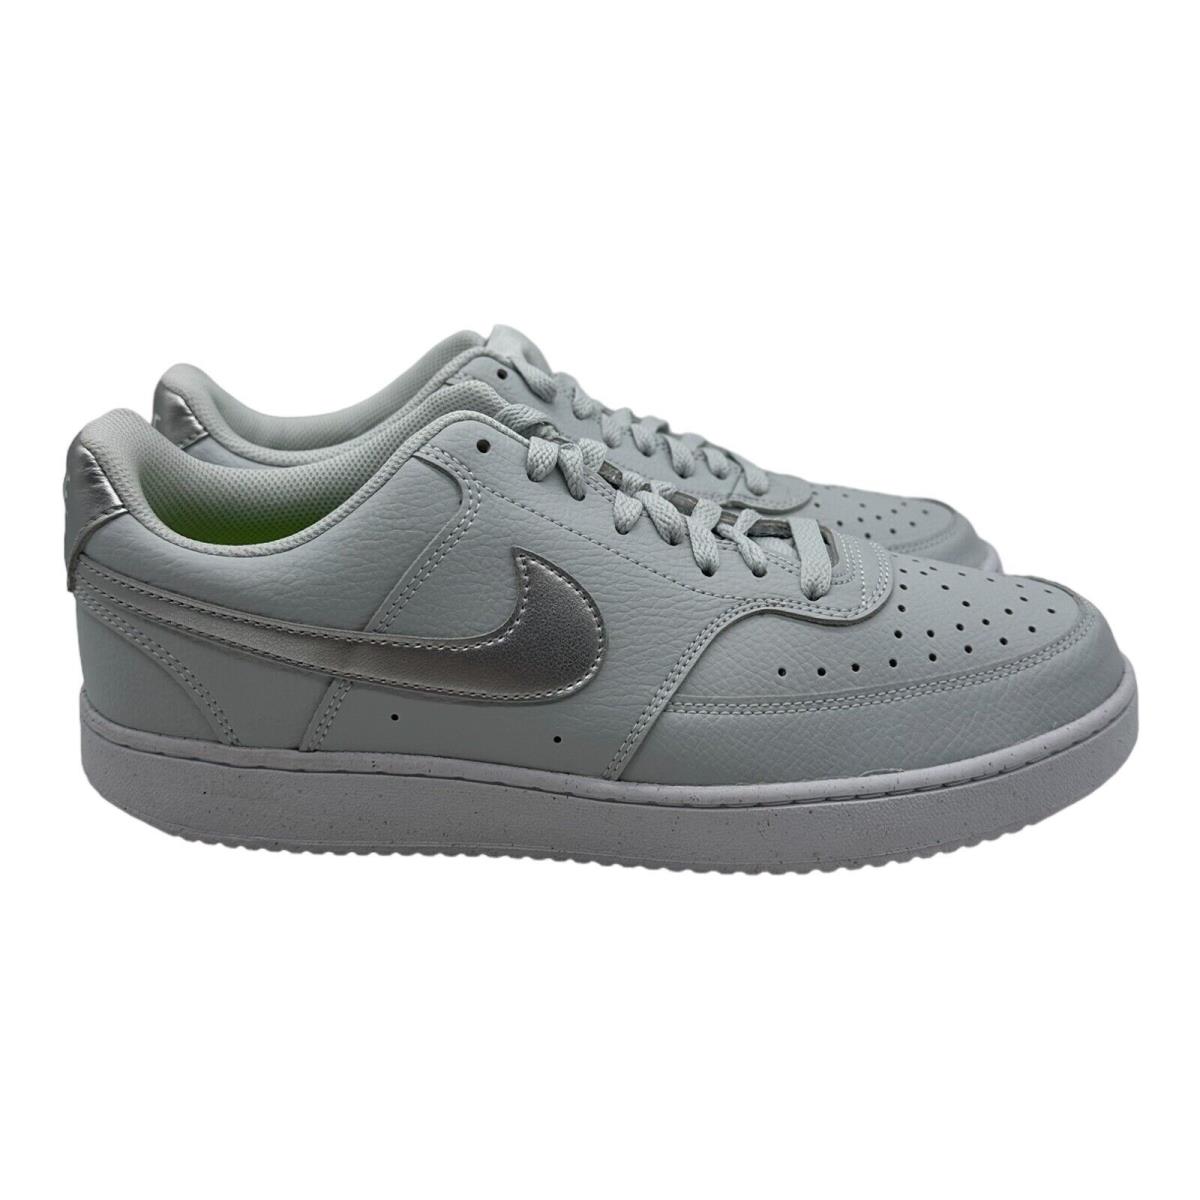 Nike Court Vision Lo NN Shoes Women`s 11 Gray/silver Casual Sneakers DH3158-002 - Silver